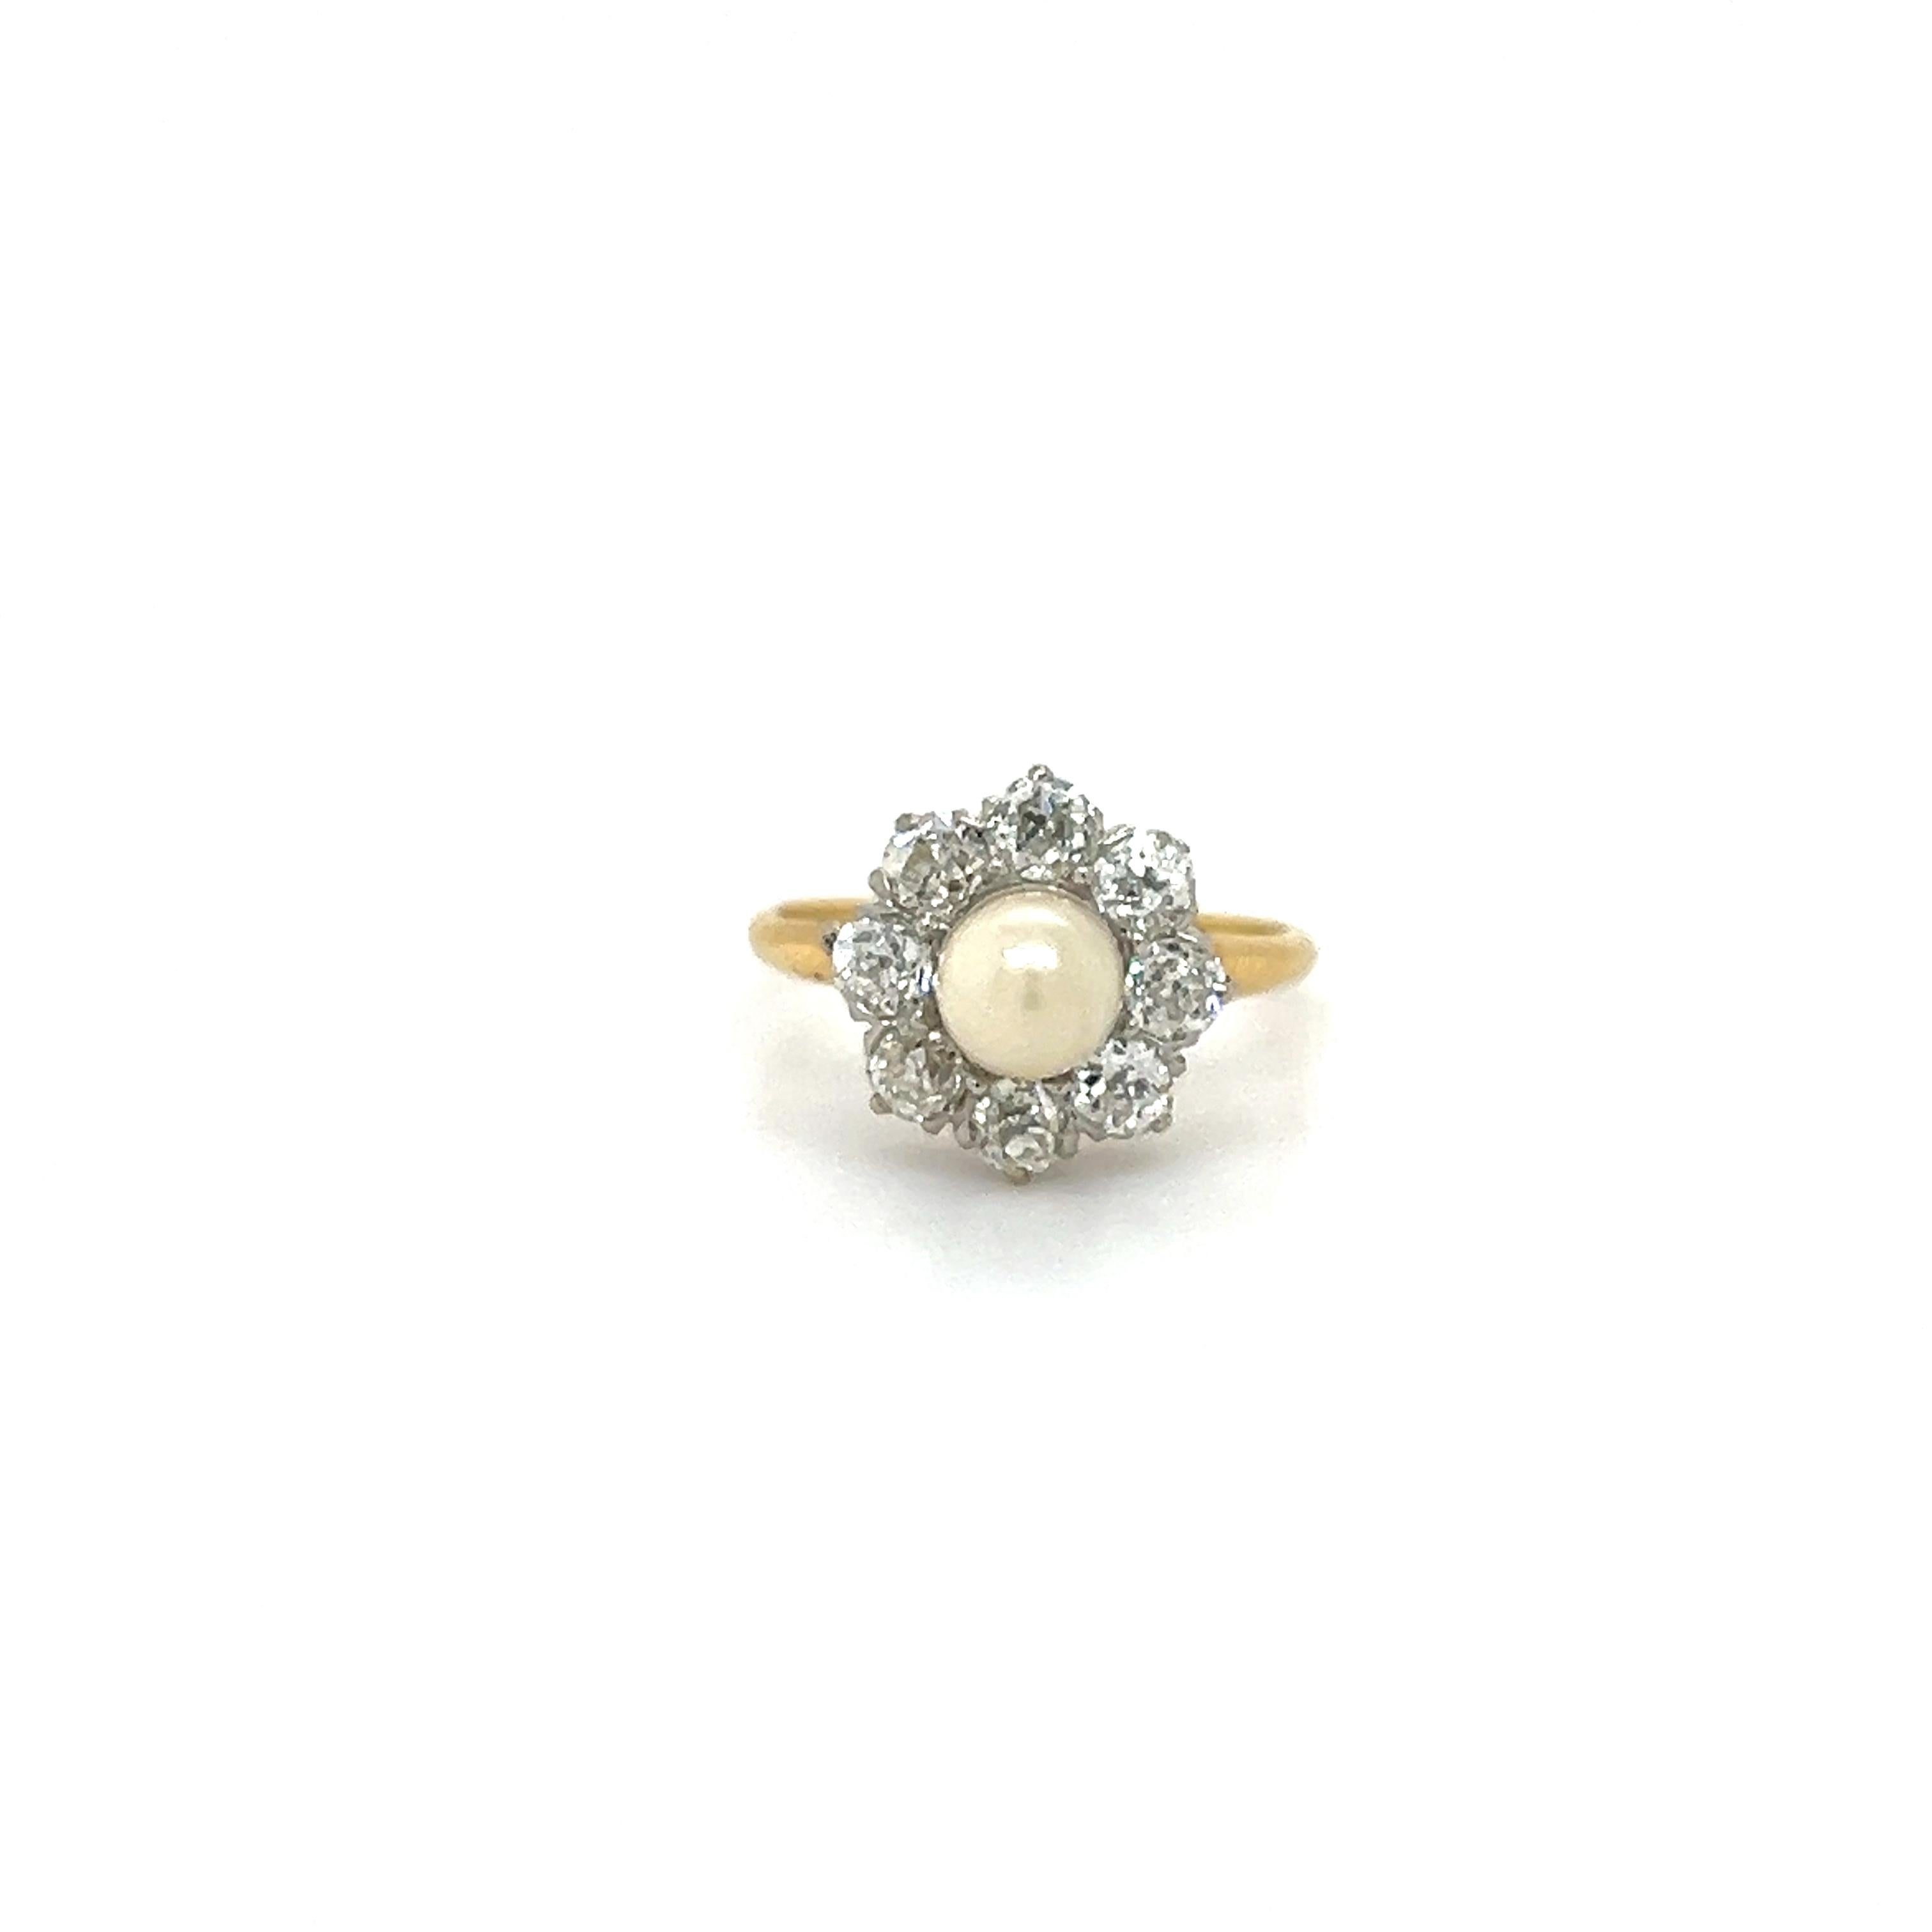 Beautiful ring crafted in 18k yellow gold with a platinum top. The ring is from the Victorian era as it showcases one natural round pearl gemstone with a phenomenal luster. The pearl is surrounded by old mine cut diamonds, eight in total set in a